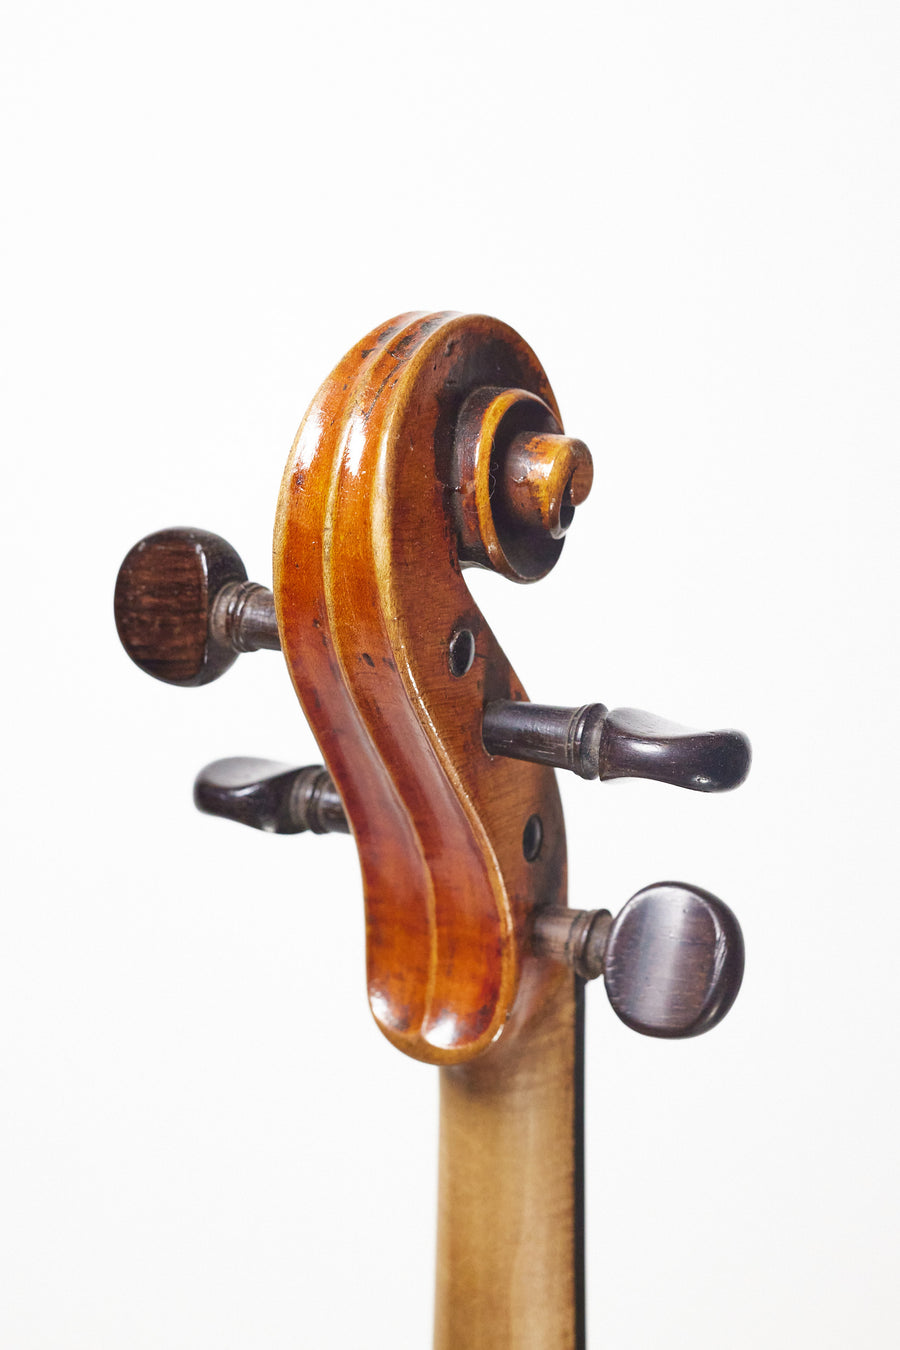 A Well Preserved Violin By Jacques Barbe In Mirecourt, C. 1840.